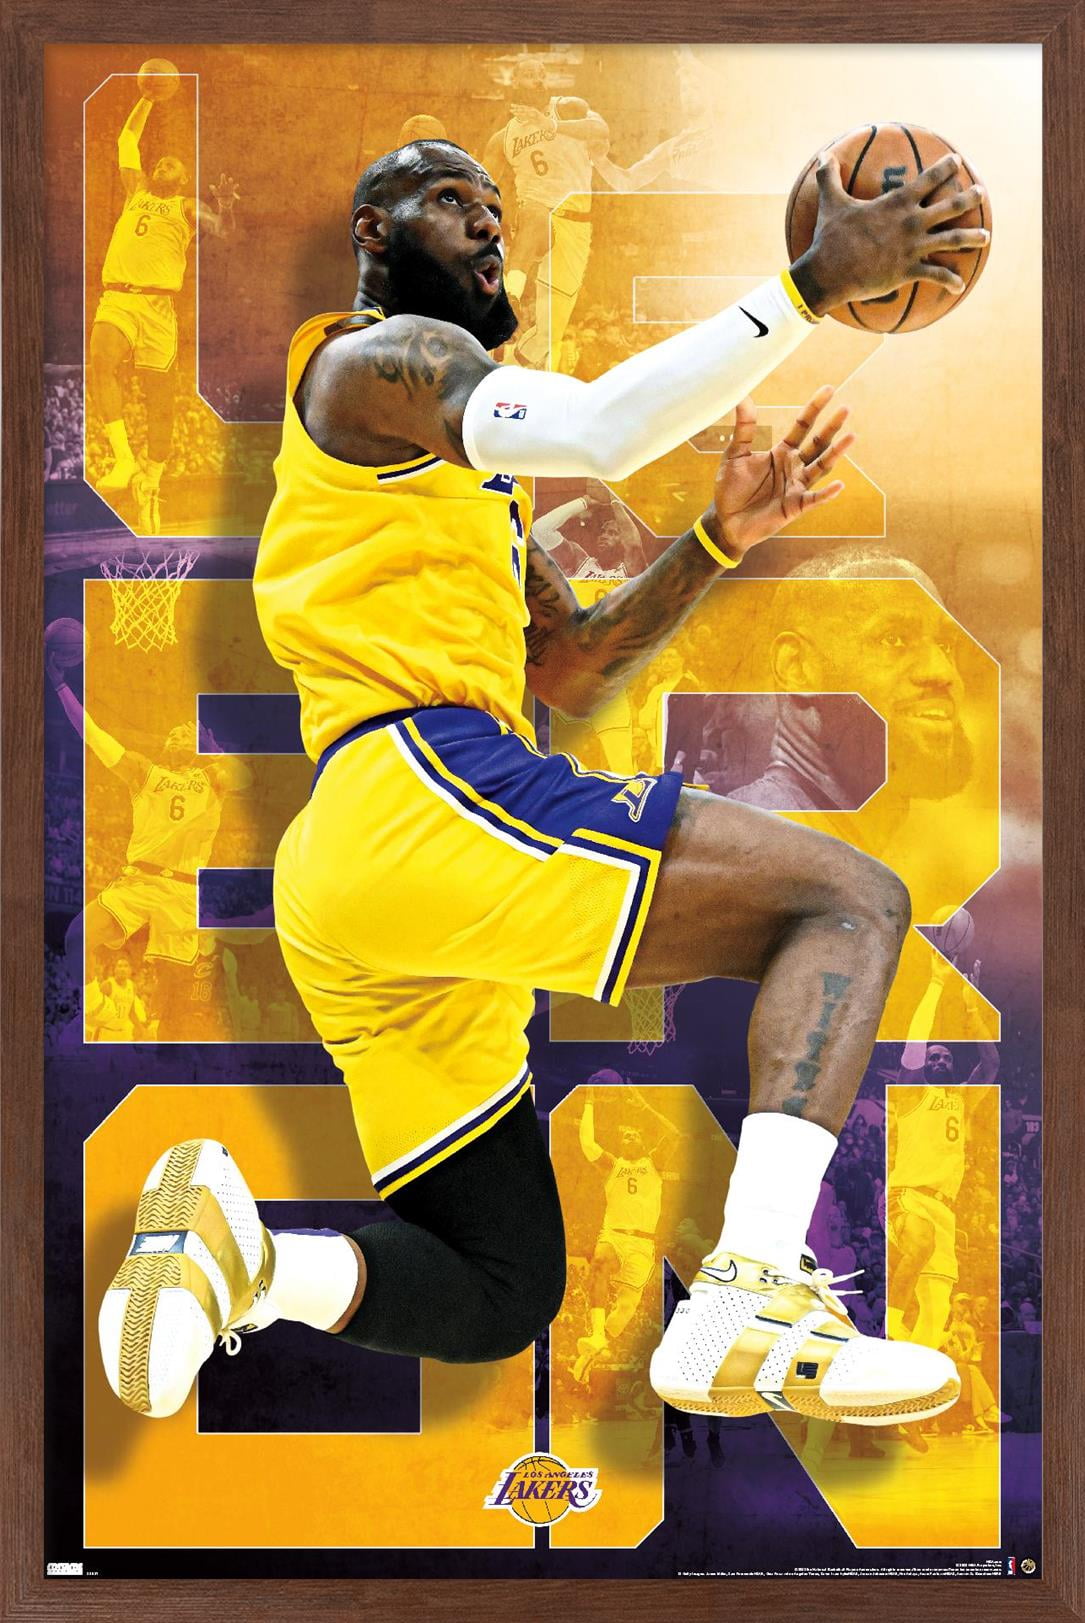 NBA Los Angeles Lakers - LeBron James 20 Wall Poster, 22.375 x 34, Framed  